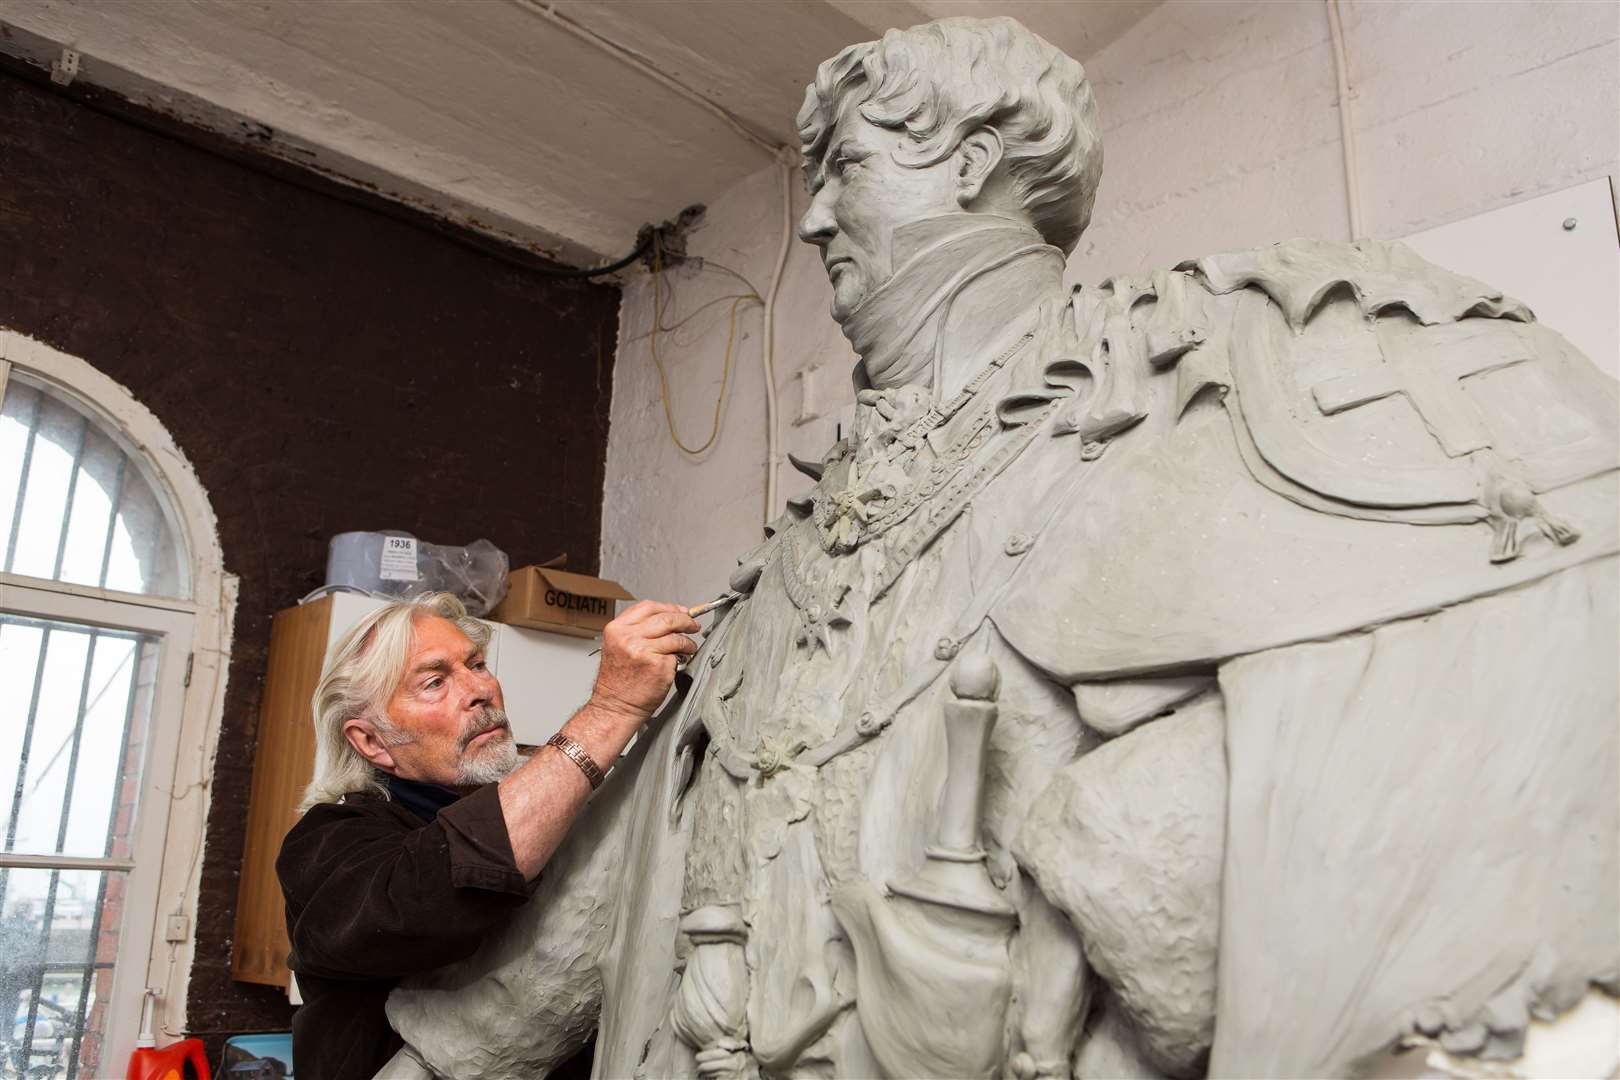 Dominic Grant working in his Ramsgate harbour studio on the King George IV statue - he passed away before it was completed